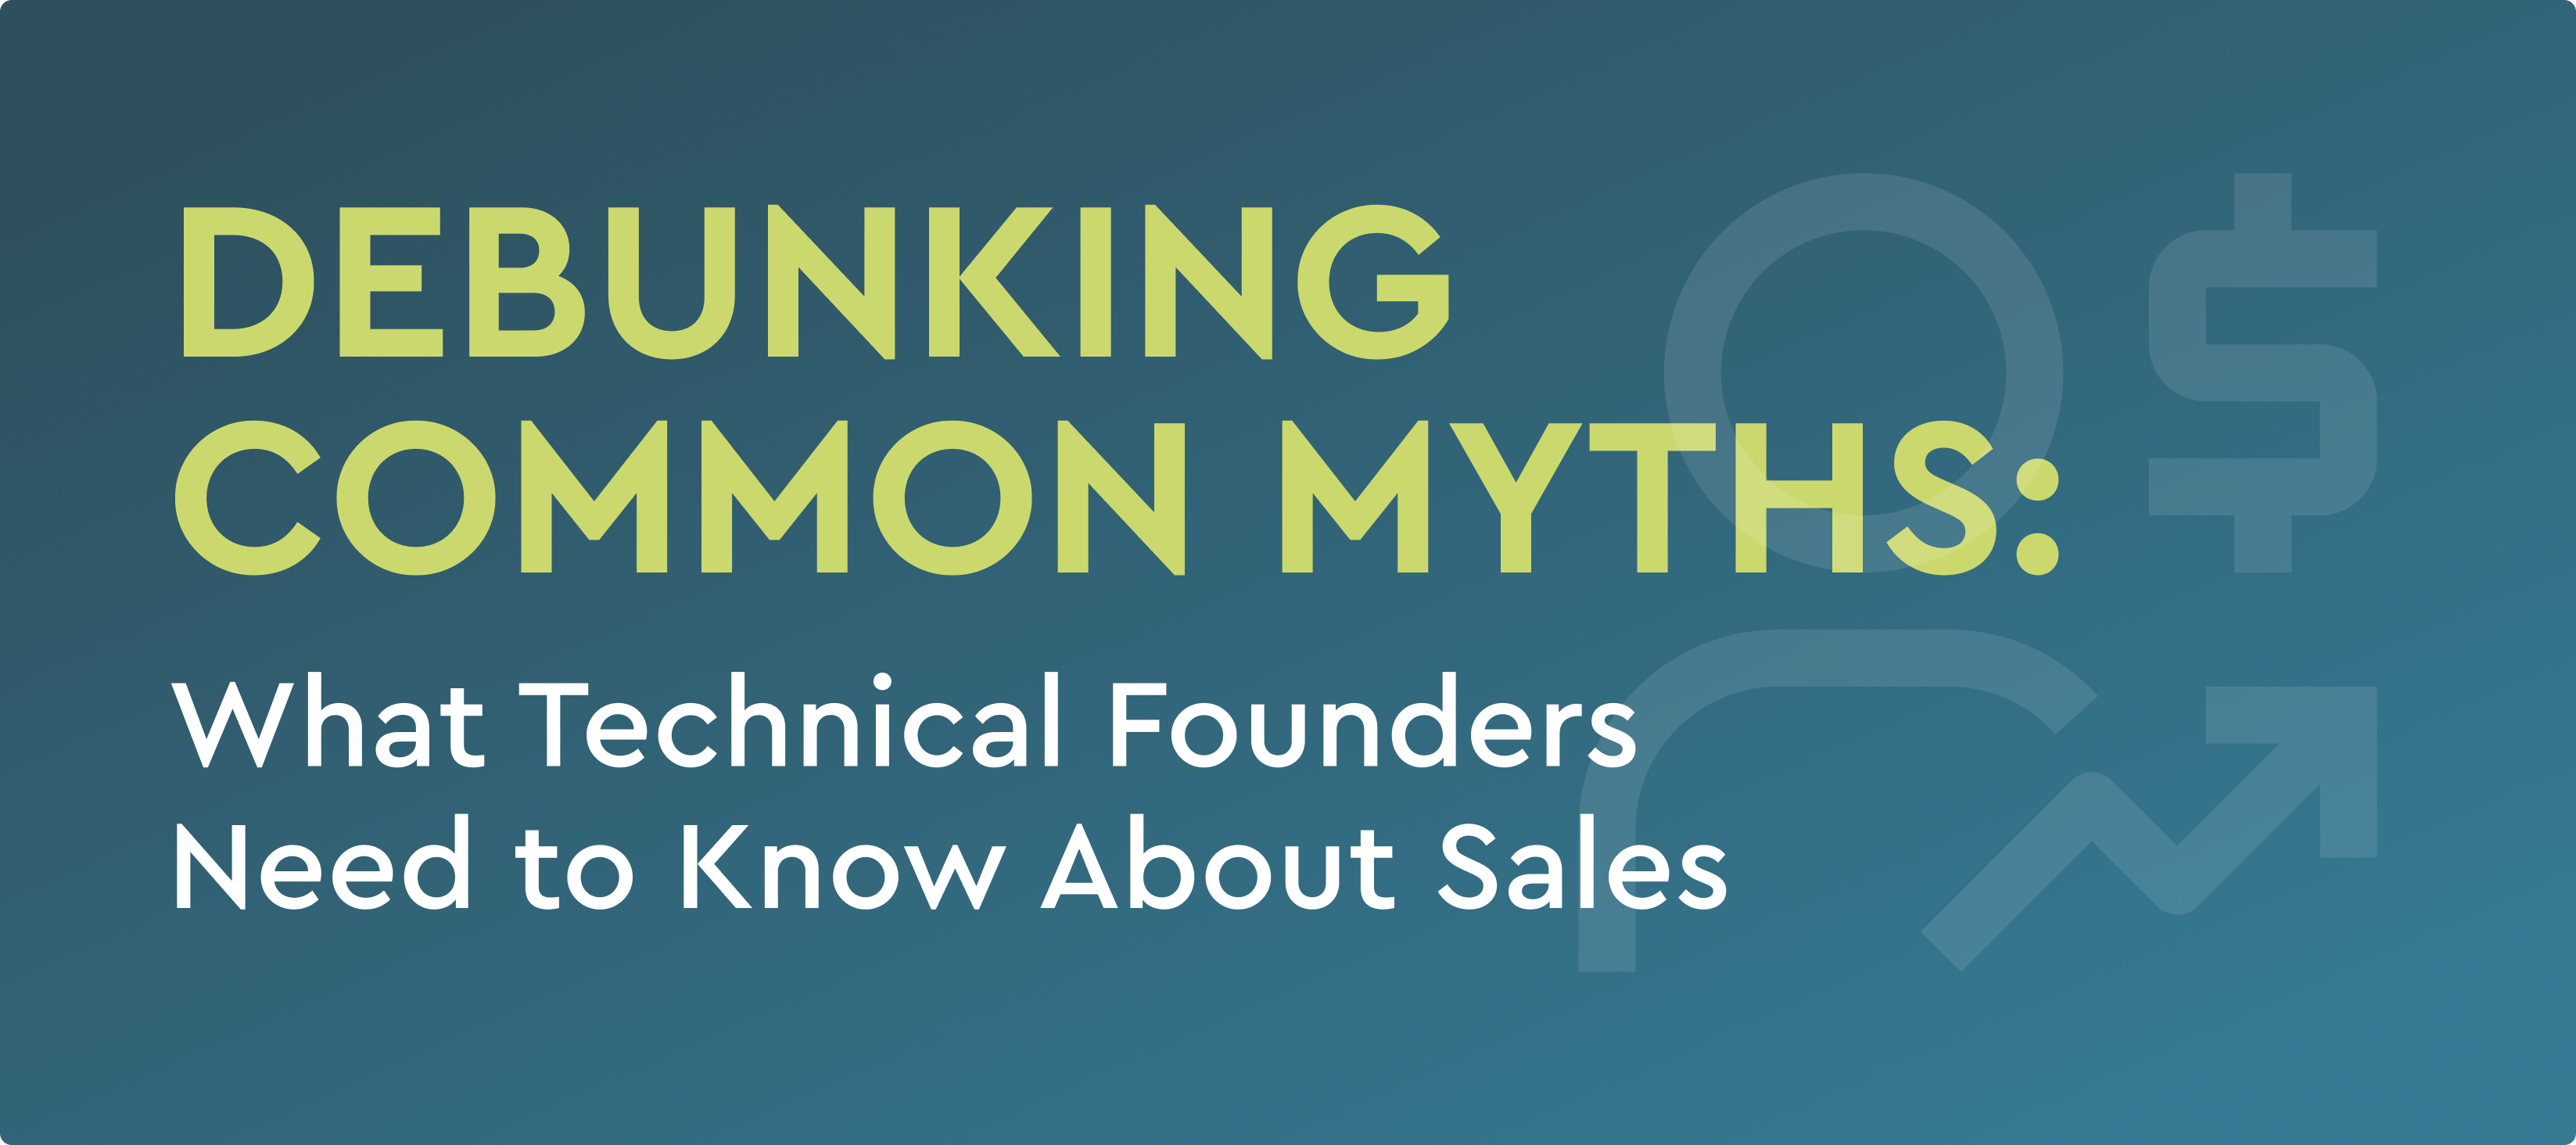 Debunking common myths: what technical founders need to know about sales